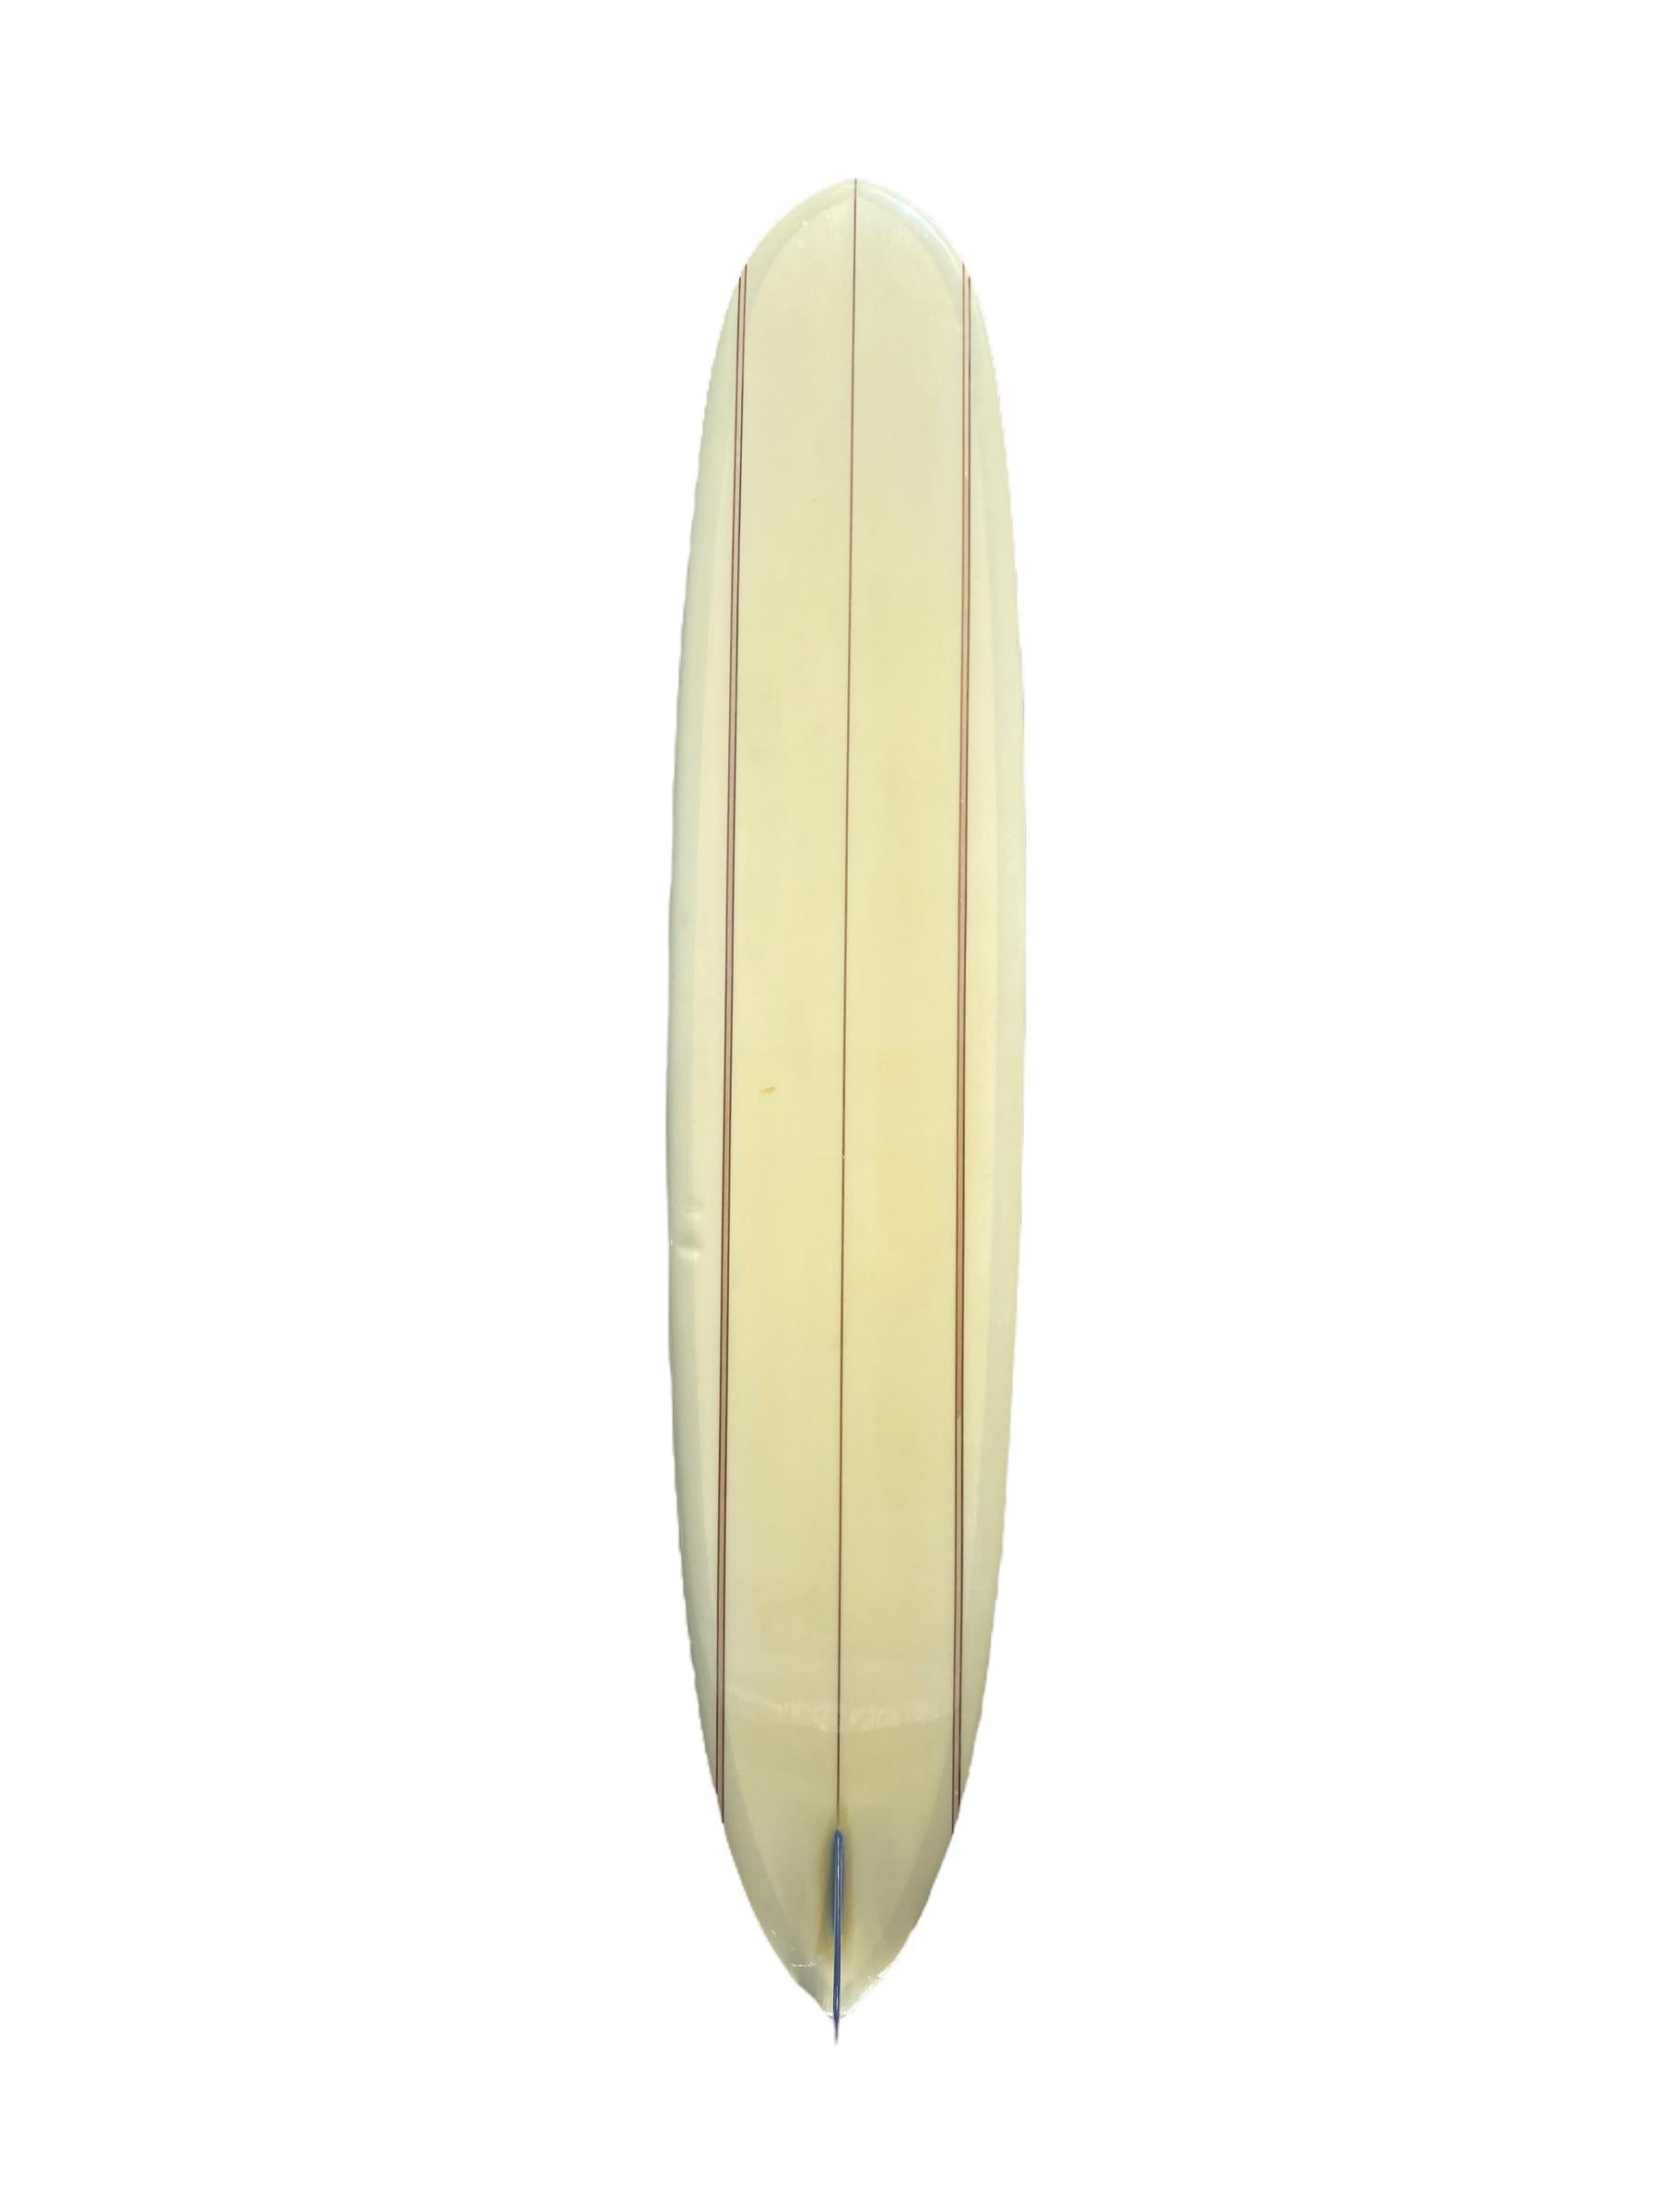 1967 replica Bing Surfboards Dick Brewer Pipeliner surfboard #1 of 100. Shaped by Dan Bendiksen. Features 7 wood stringers and a pintail shape with blue fixed single fin. A tribute surfboard made to Dick Brewer’s exact specifications of his original